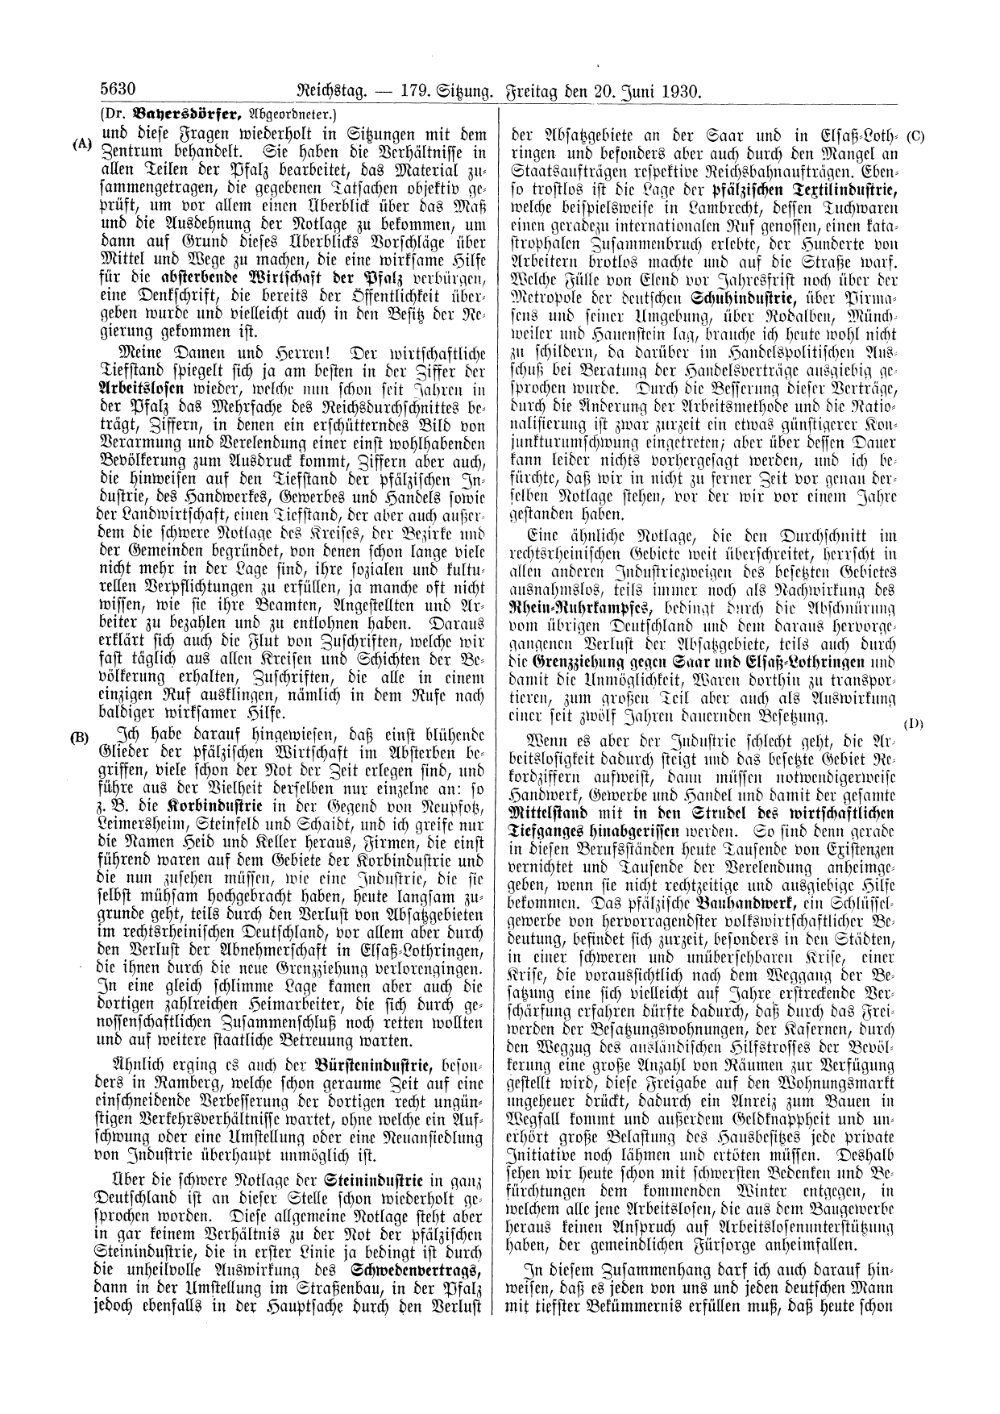 Scan of page 5630